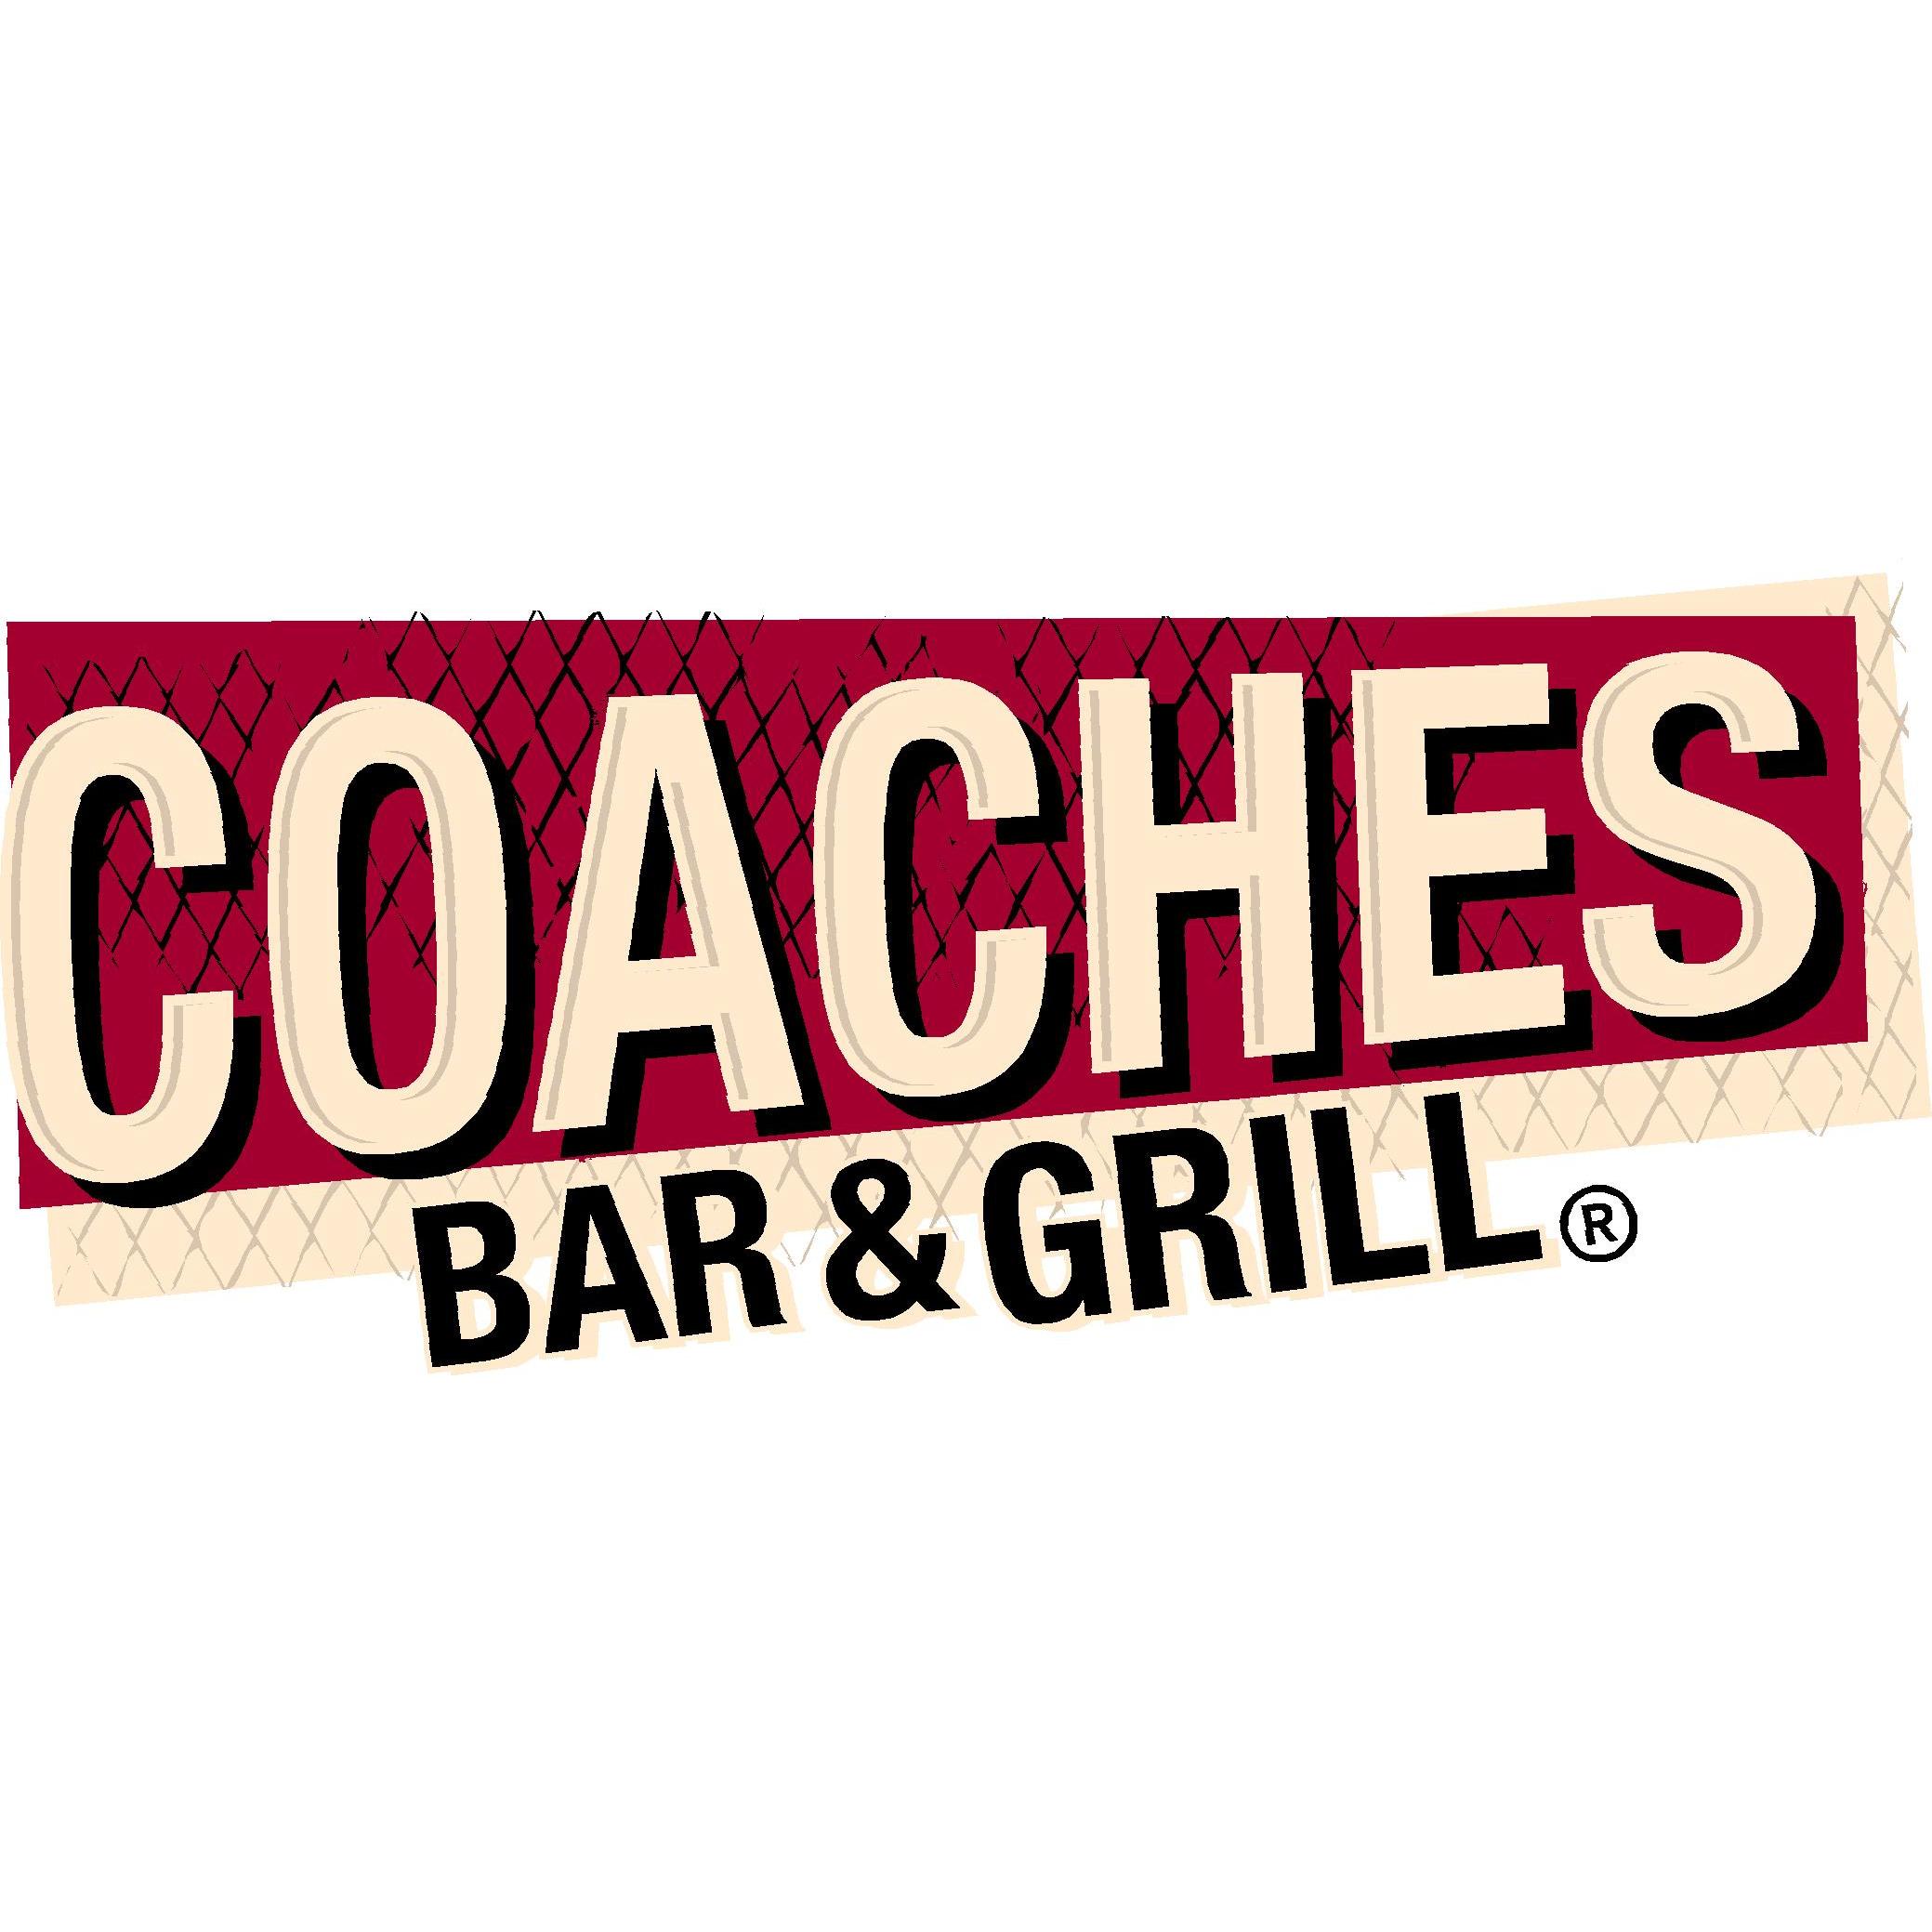 Coaches Sports Bar & Grill - Bloomington, IN 47404 - (812)339-3537 | ShowMeLocal.com